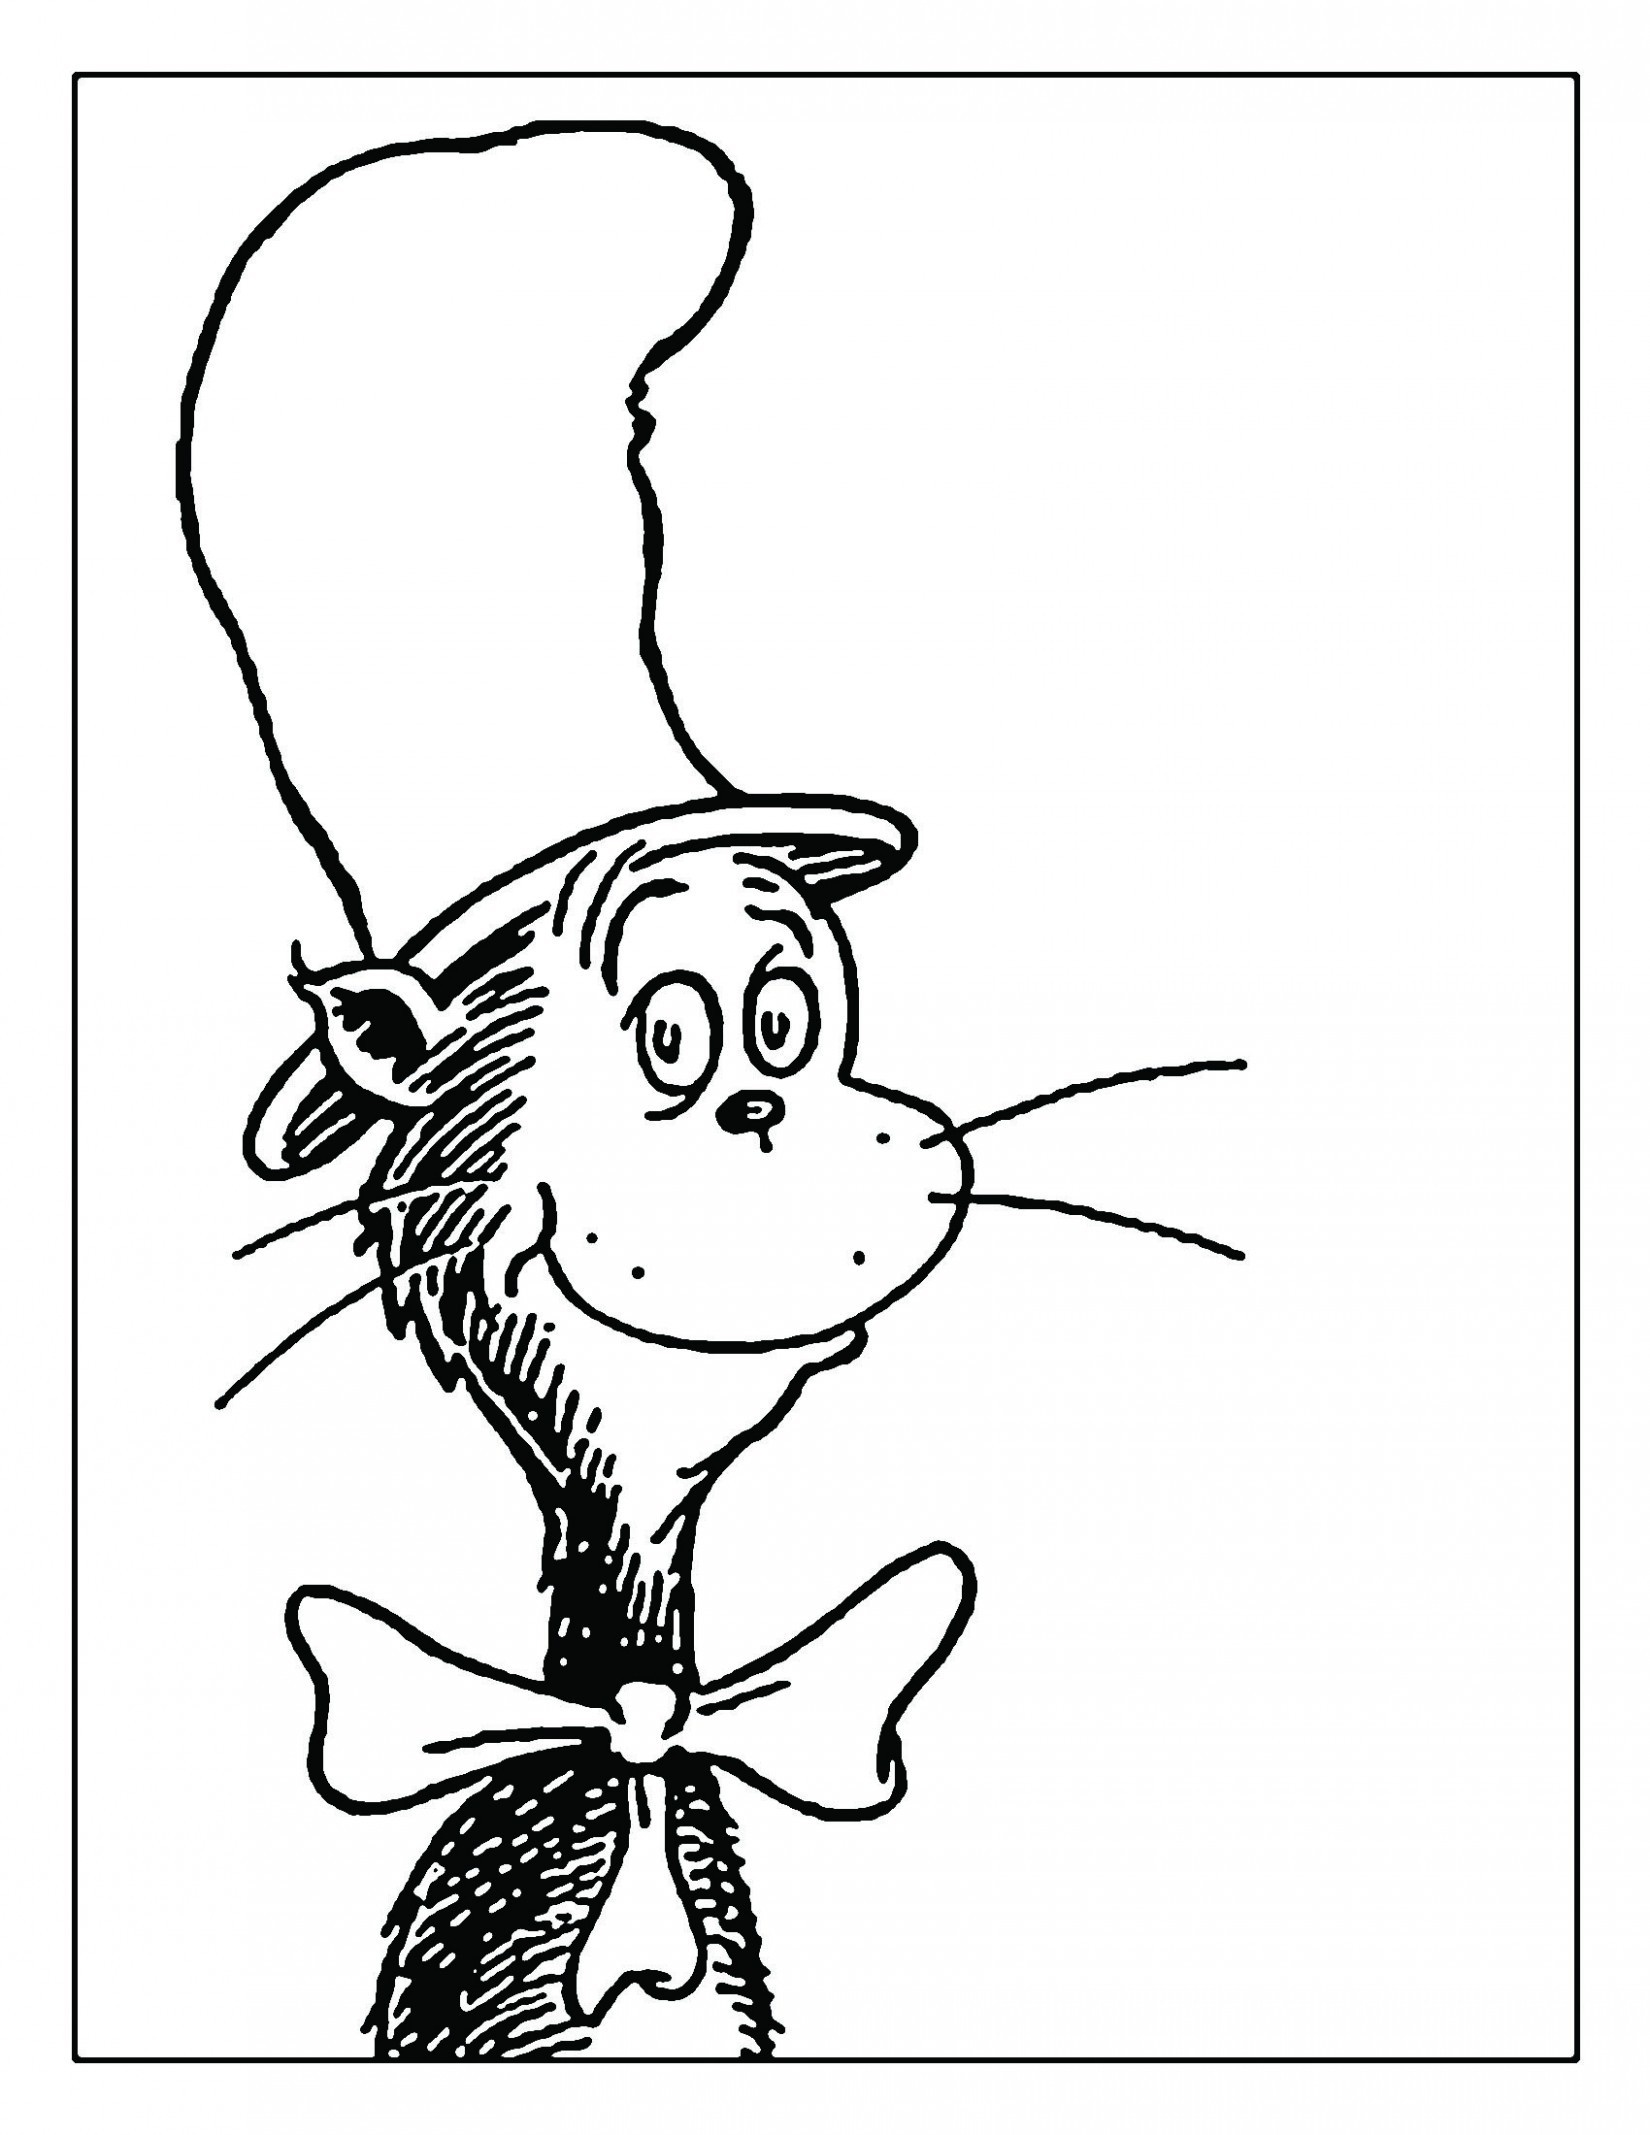 Dr Seuss Images Free | Free Download Best Dr Seuss Images Free On - Free Printable Dr Seuss Coloring Pages